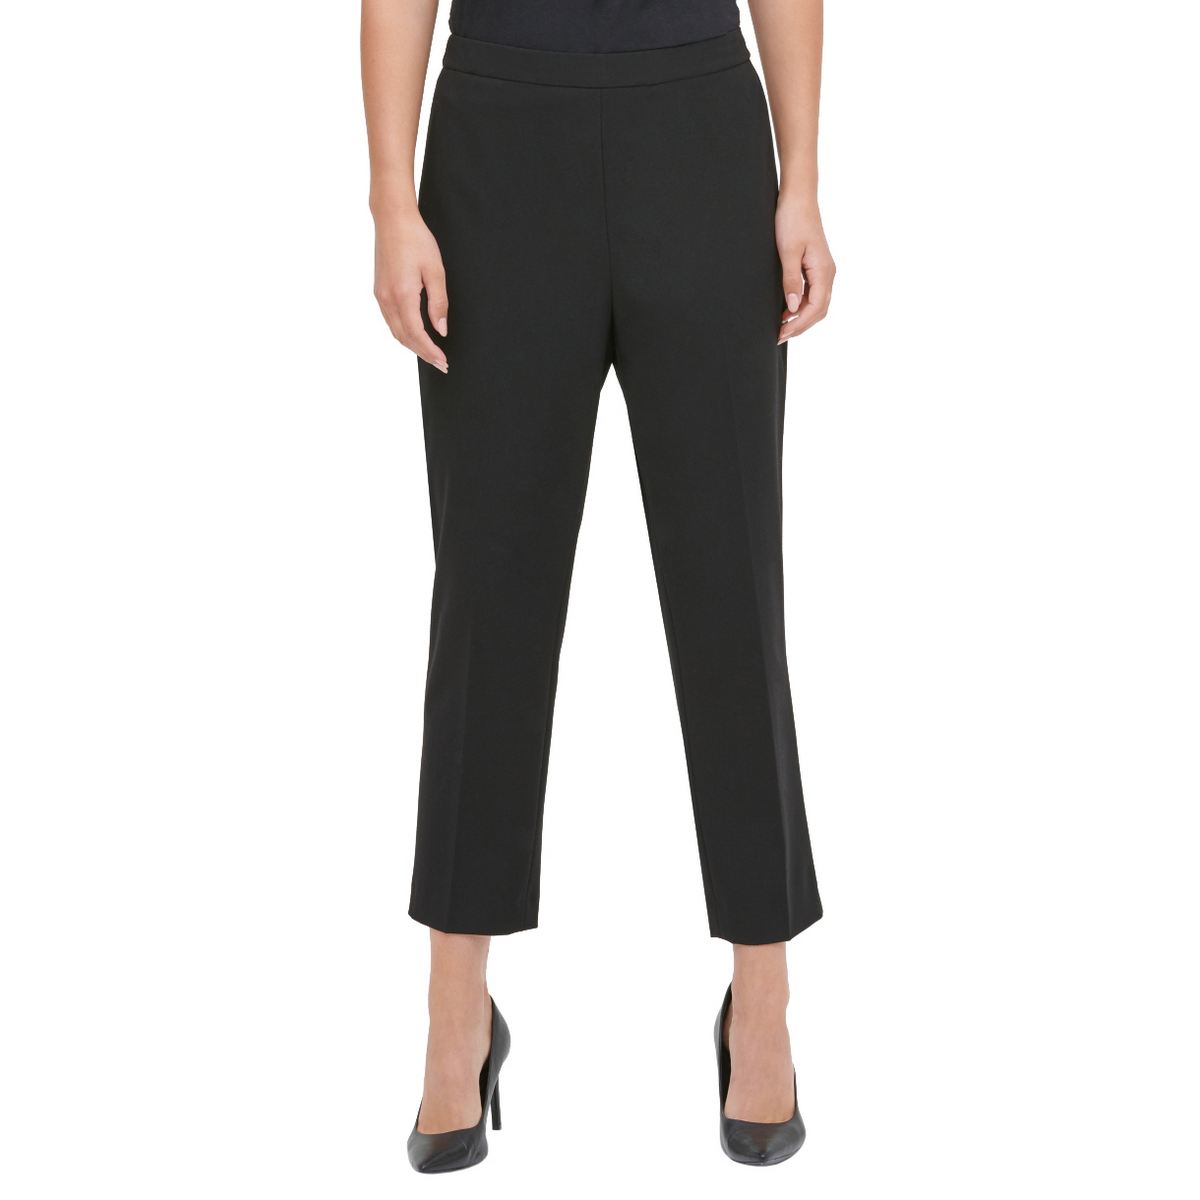 CALVIN KLEIN NEW Women's Black Solid Pull-on Straight-leg Casual Pants ...